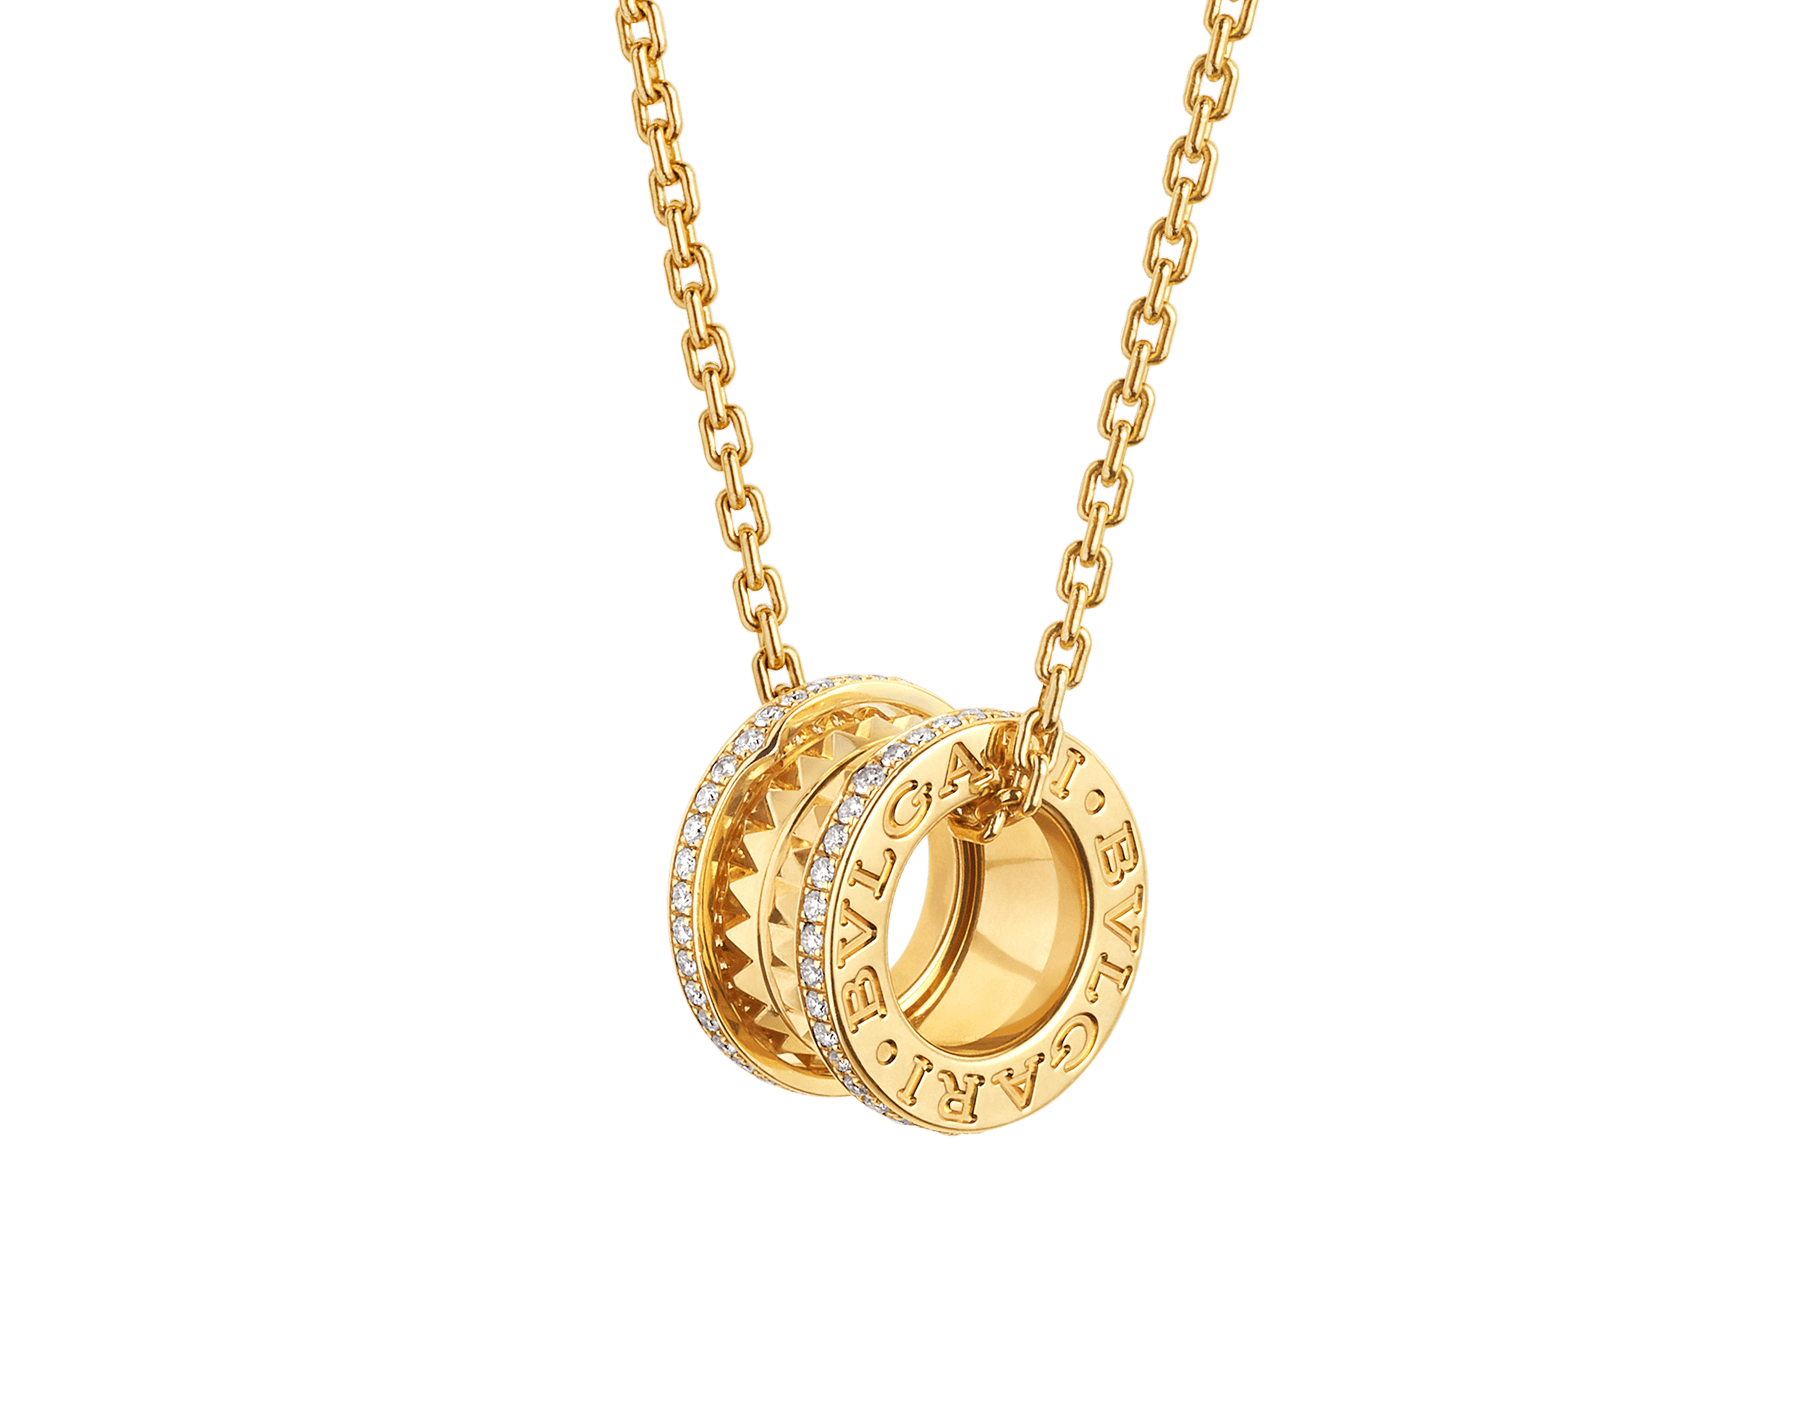 replica B.zero1 Rock necklace with 18 kt yellow gold pendant